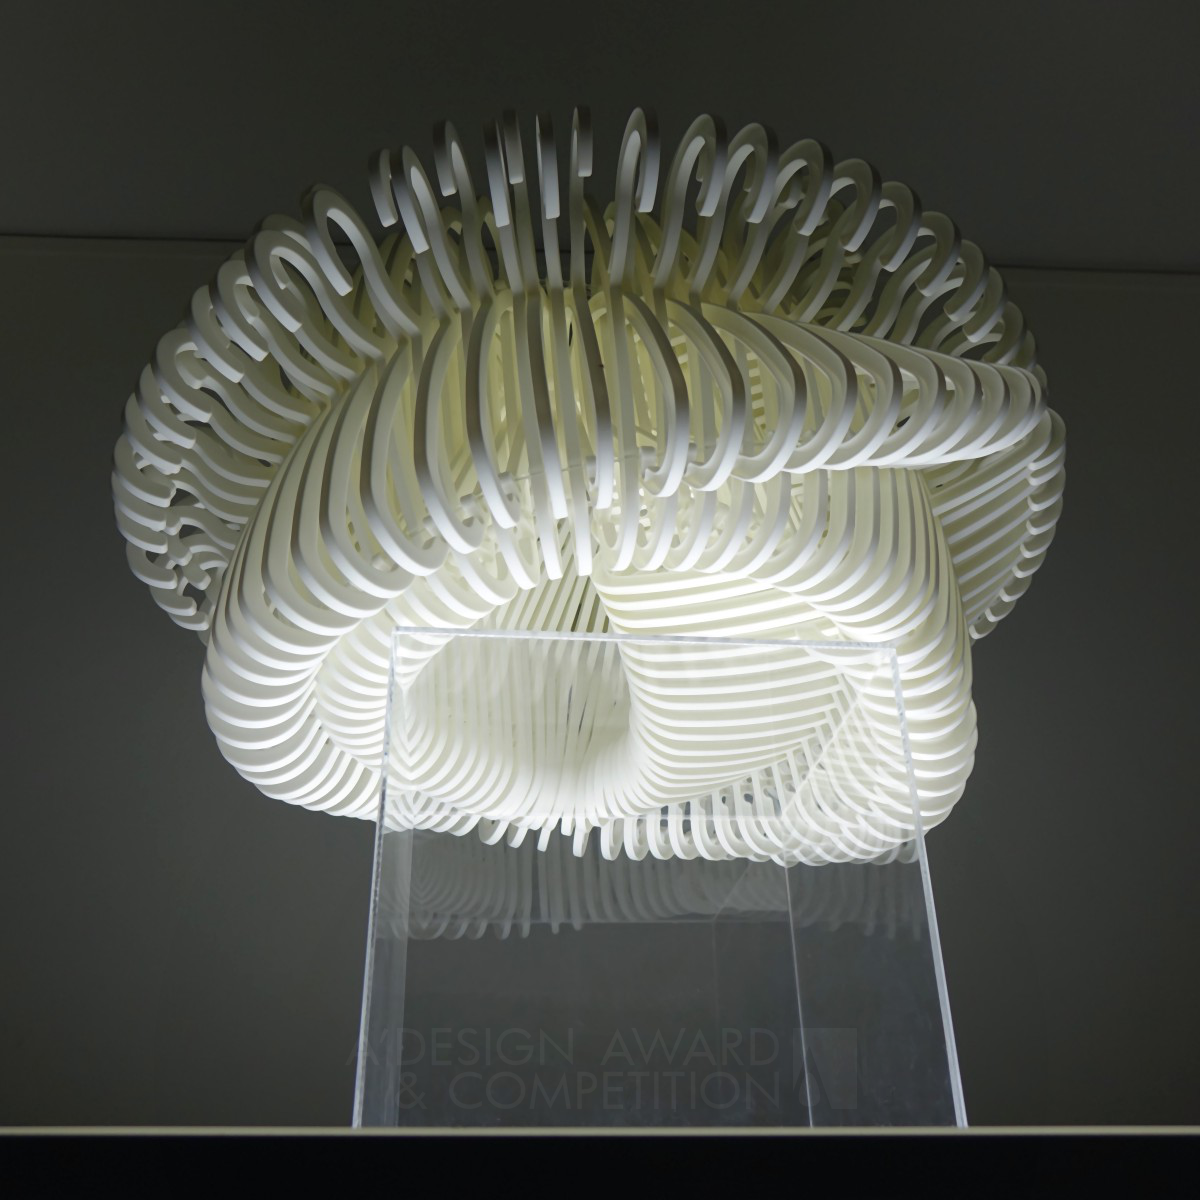 A Dream tabletop lighting installation by Naai-Jung Shih